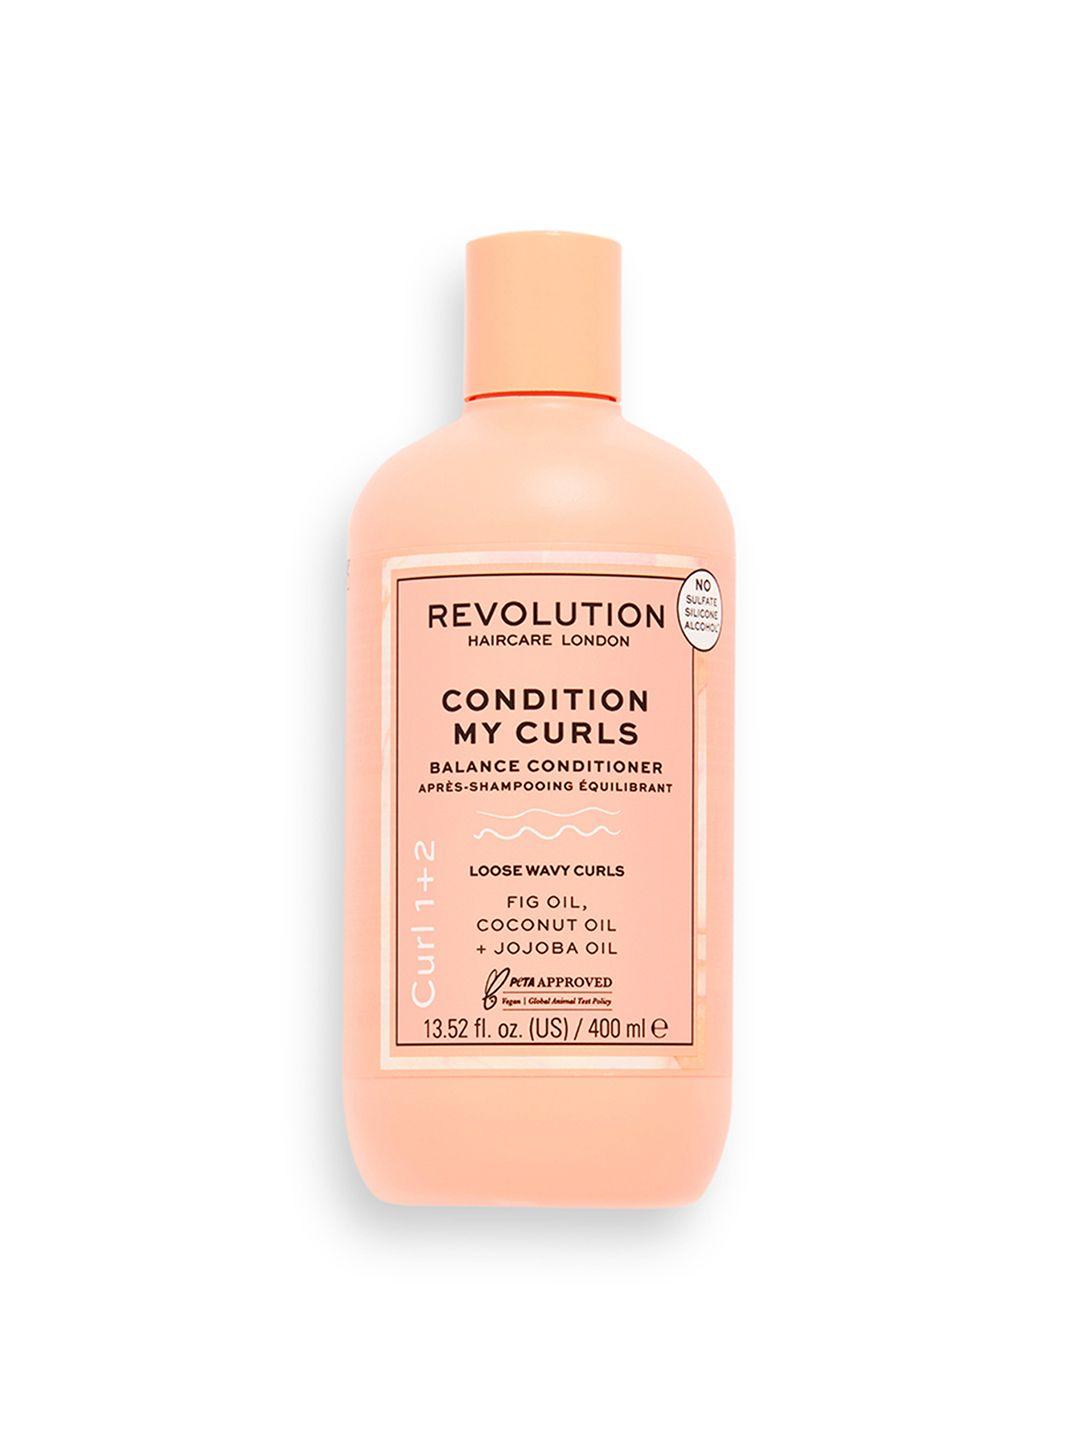 revolution haircare condition my curls balance conditioner for type 1+2 curls - 400ml